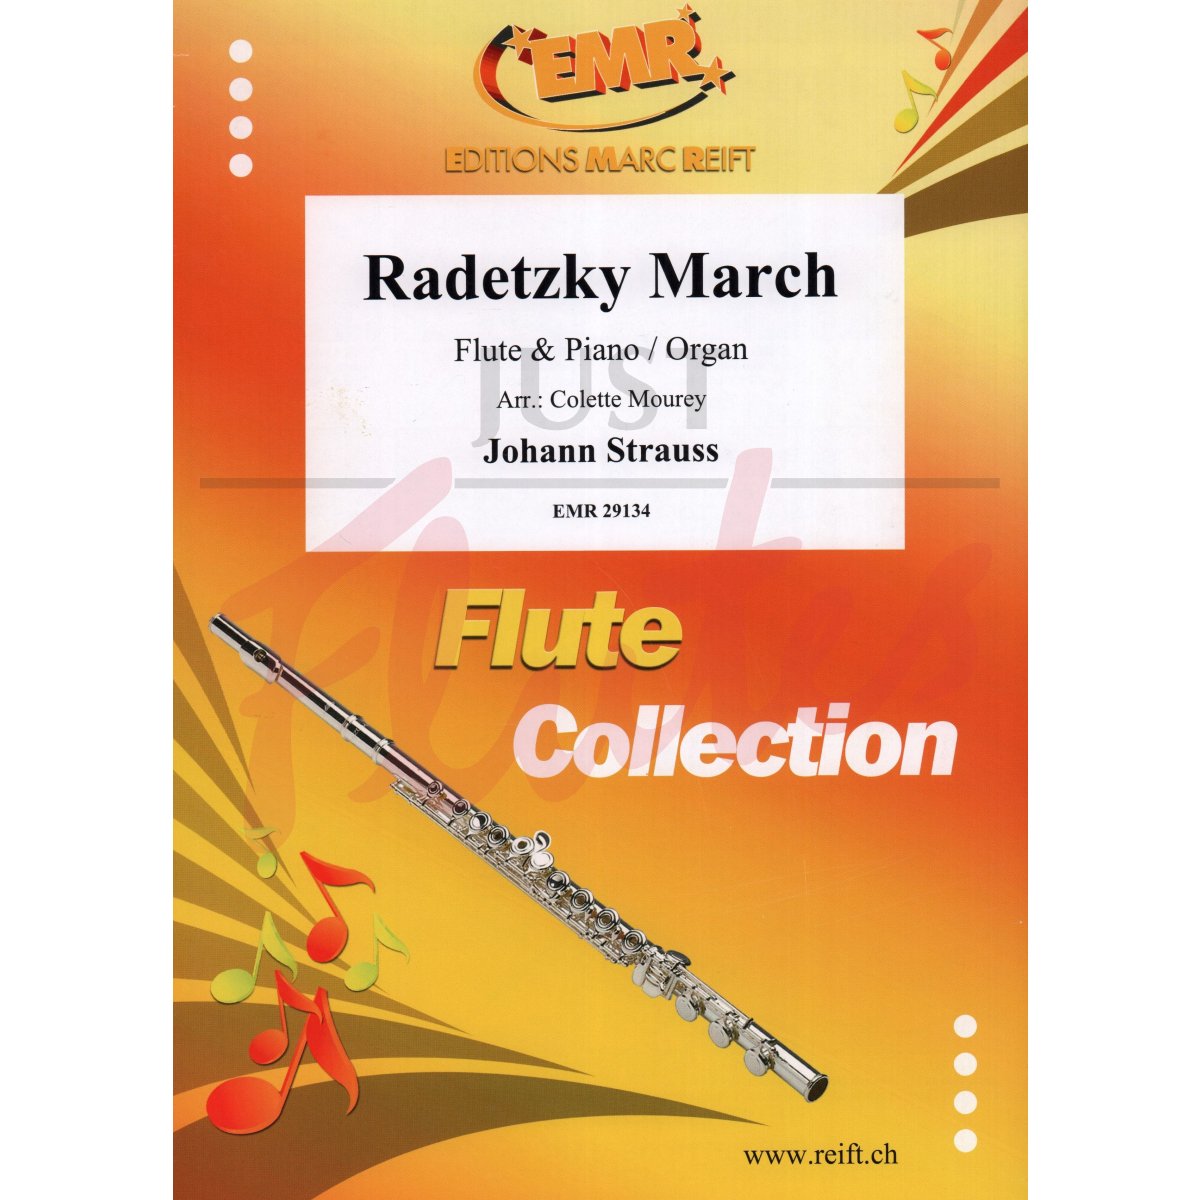 Radetzky March for Flute and Piano/Organ